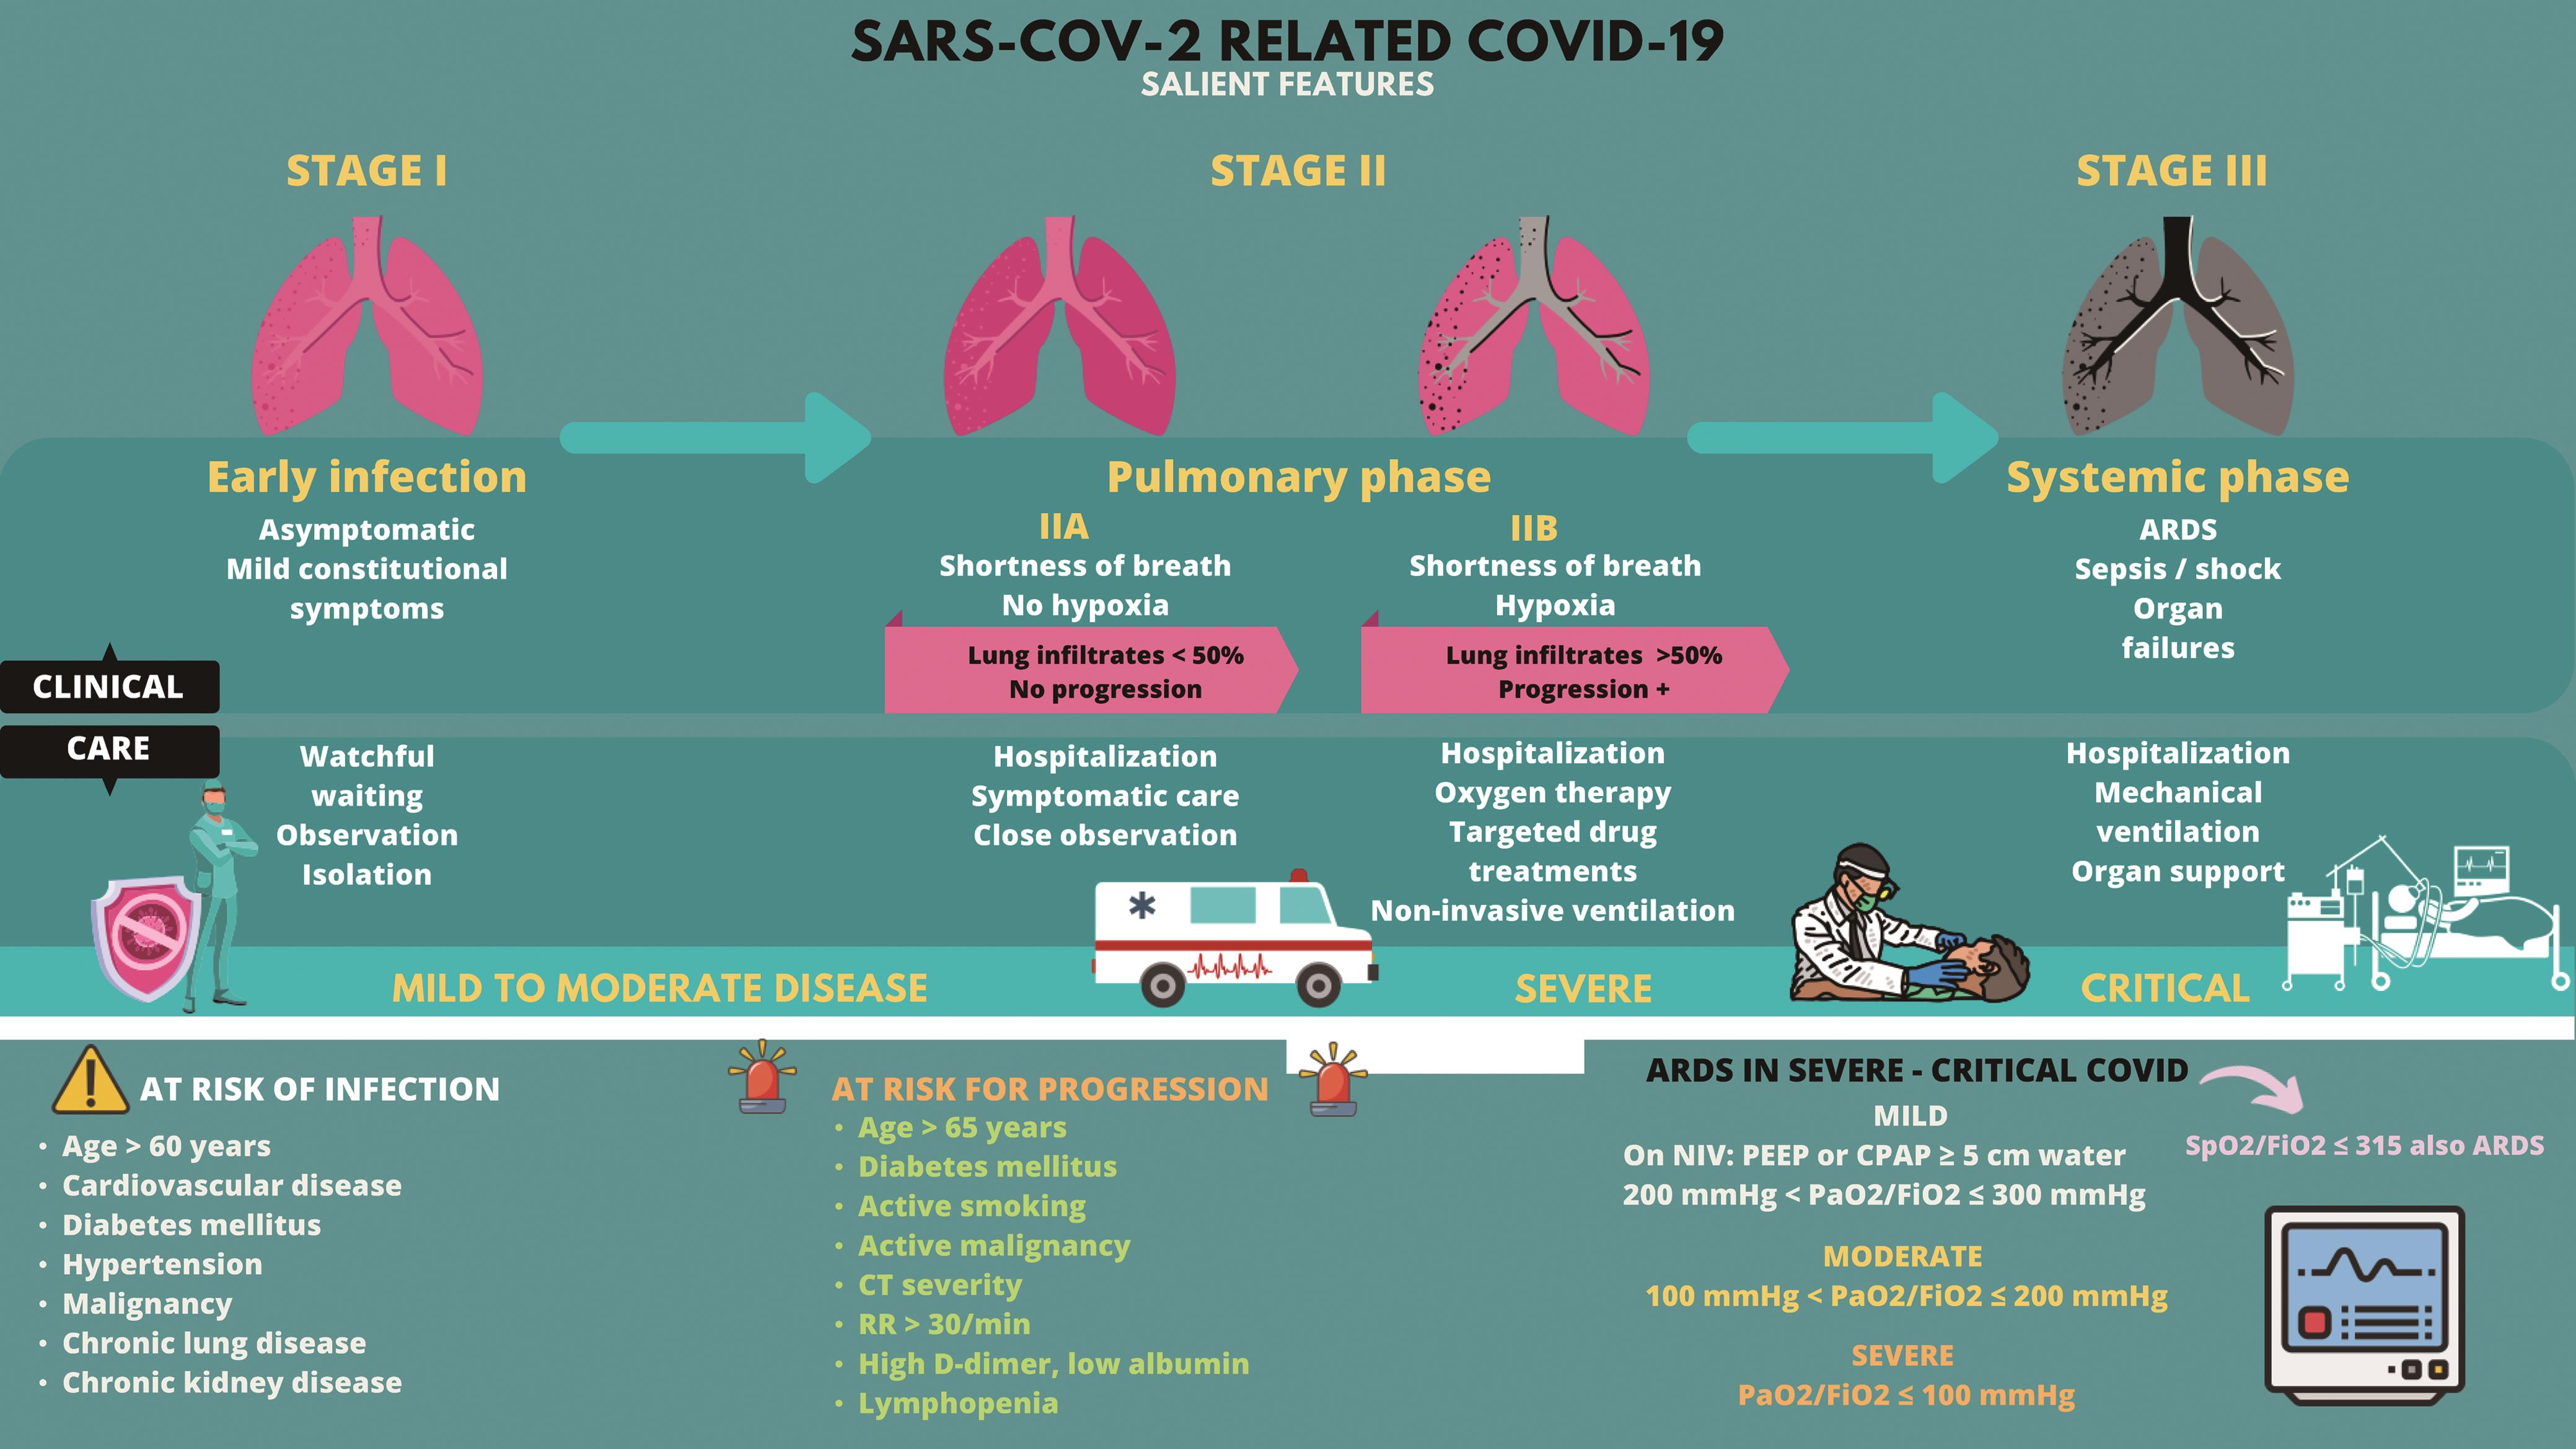 Critically Ill COVID-19 Patient with Chronic Liver Disease